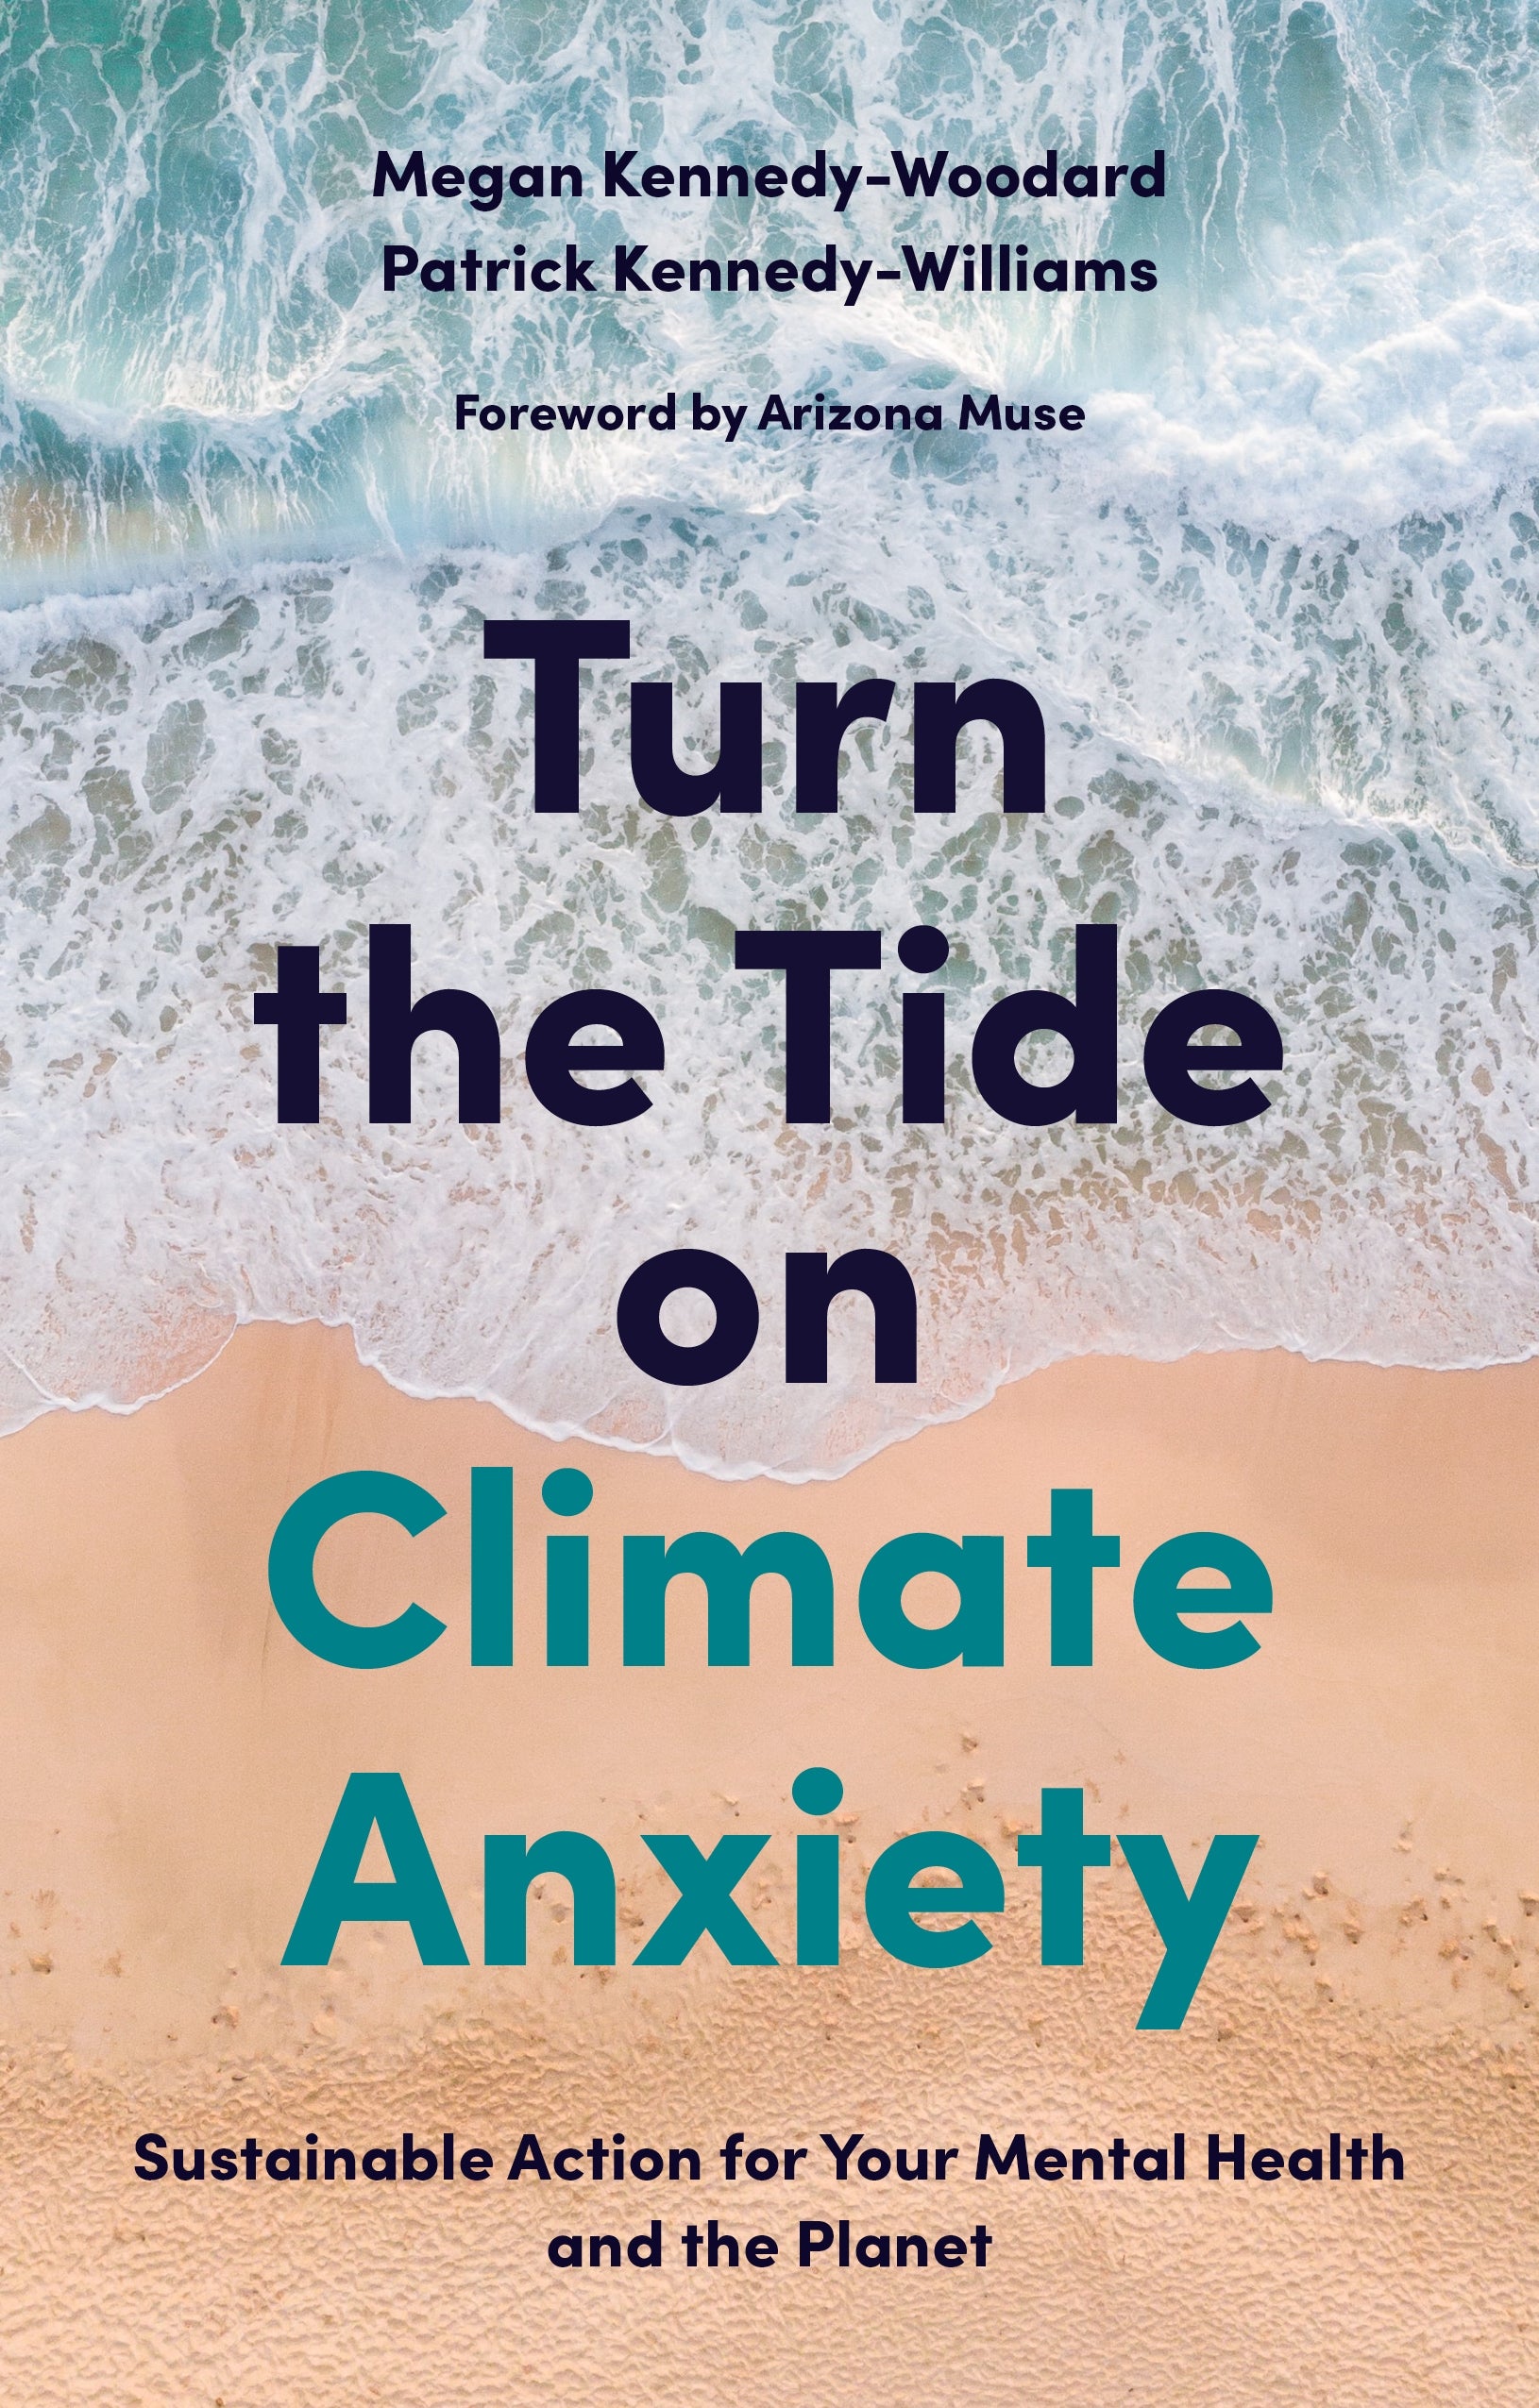 Turn the Tide on Climate Anxiety by Arizona Muse - Founder and Trustee of Dirt Foundation for the Regeneration of Earth, Megan Kennedy-Woodard, Dr. Patrick Kennedy-Williams